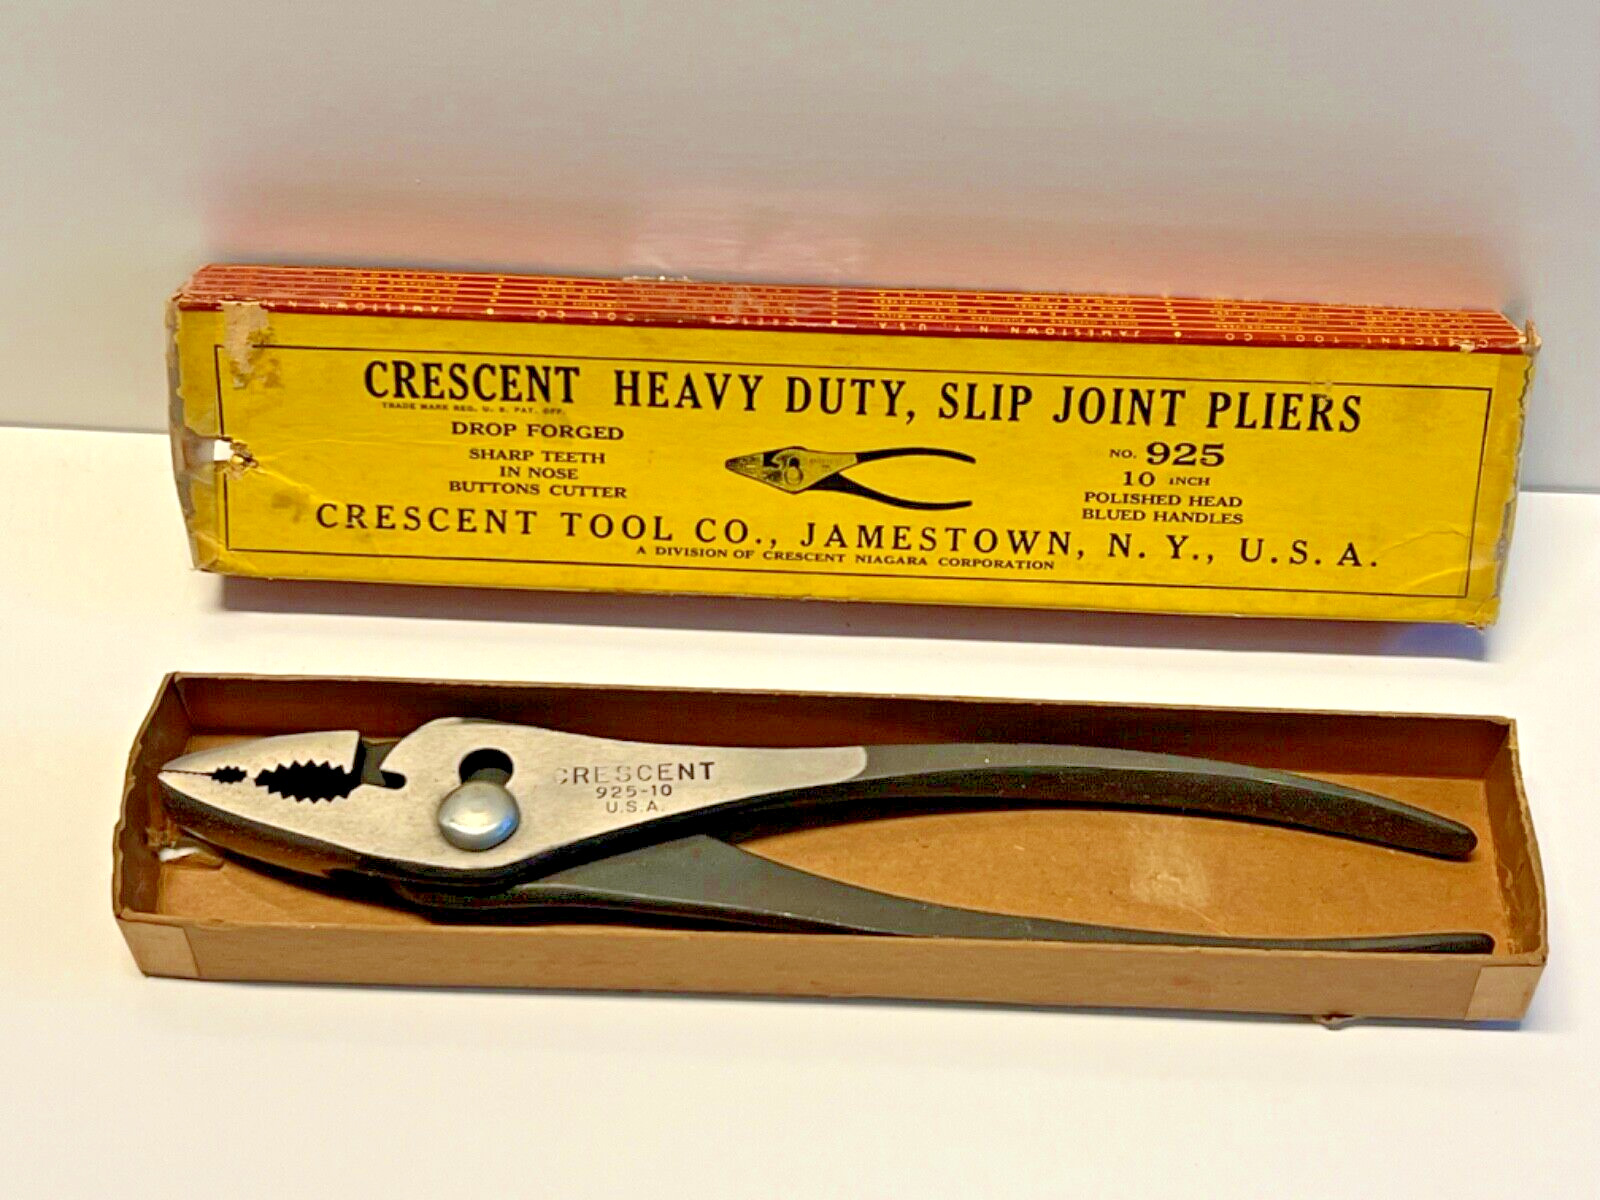 Vintage Crescent Heavy Duty Slip Joint Pliers 10 Inch-No. 925; NOS Unused; Lot 2